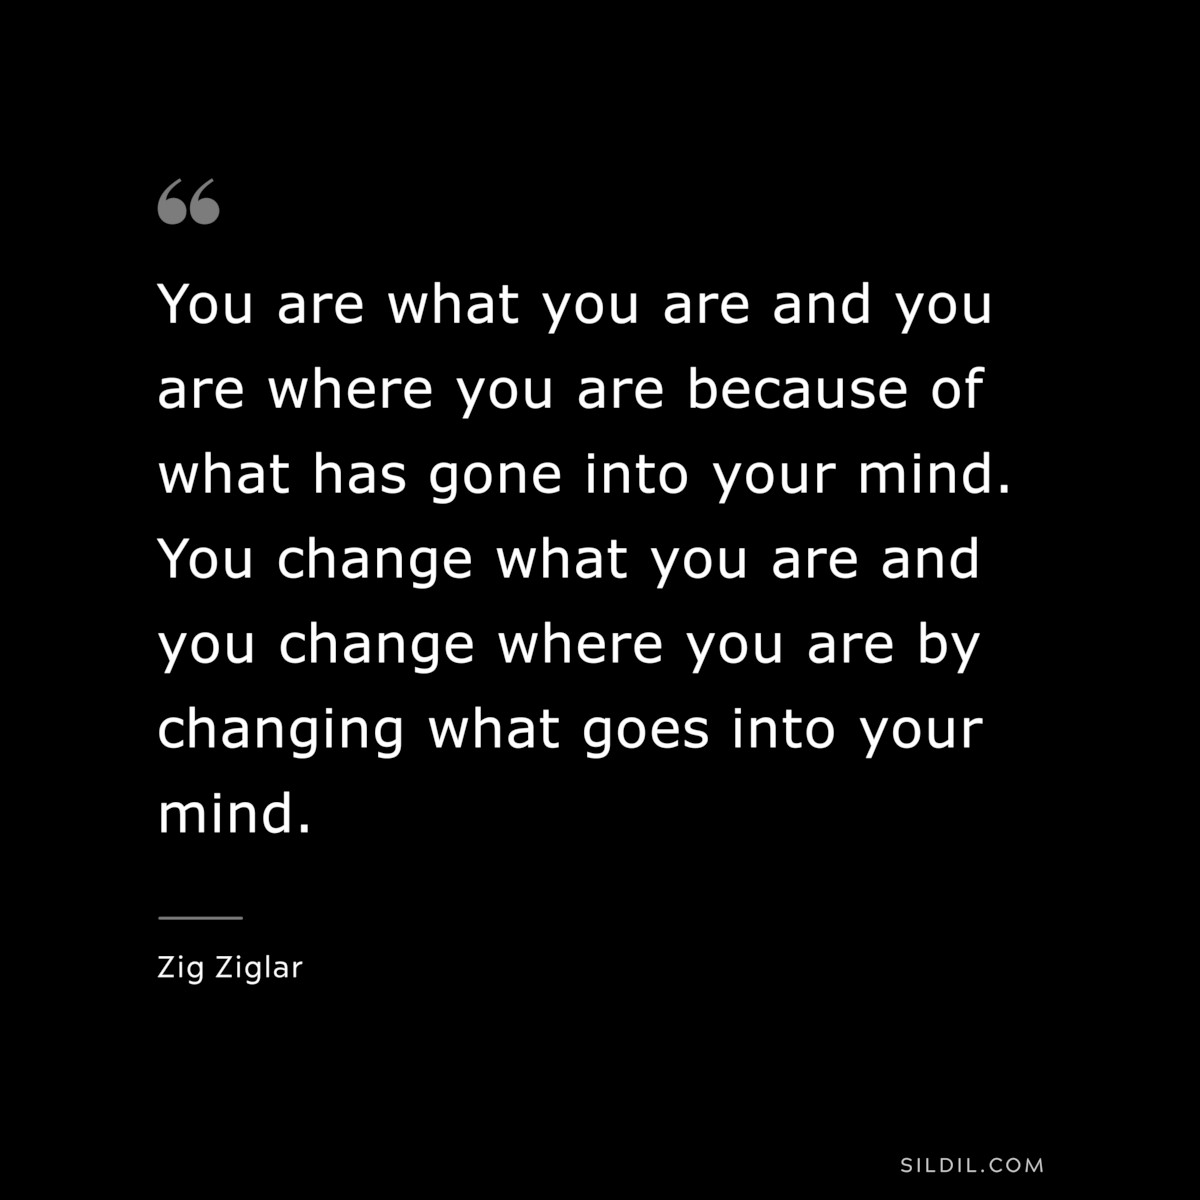 You are what you are and you are where you are because of what has gone into your mind. You change what you are and you change where you are by changing what goes into your mind. ― Zig Ziglar